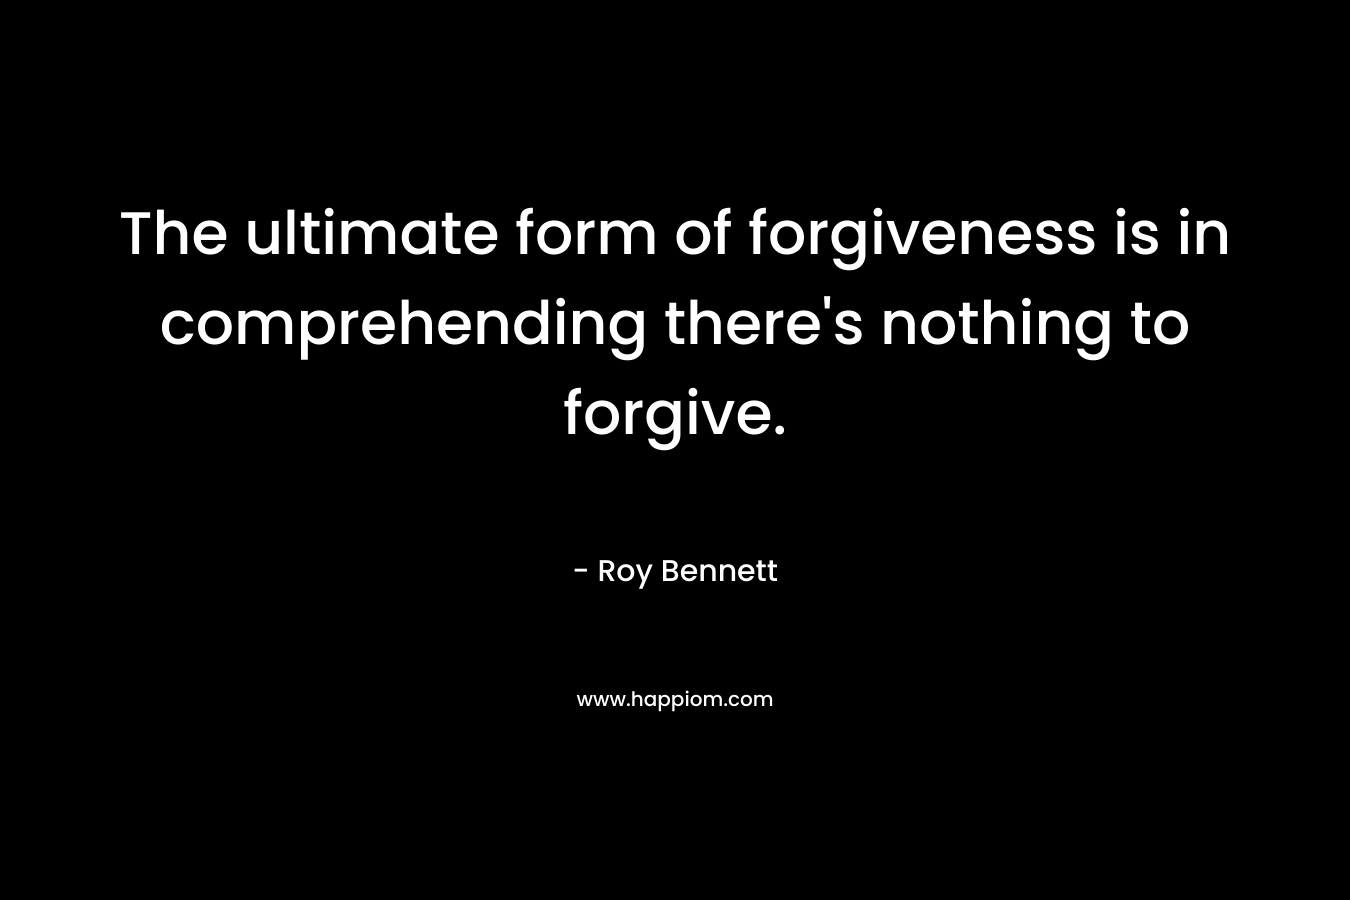 The ultimate form of forgiveness is in comprehending there's nothing to forgive.